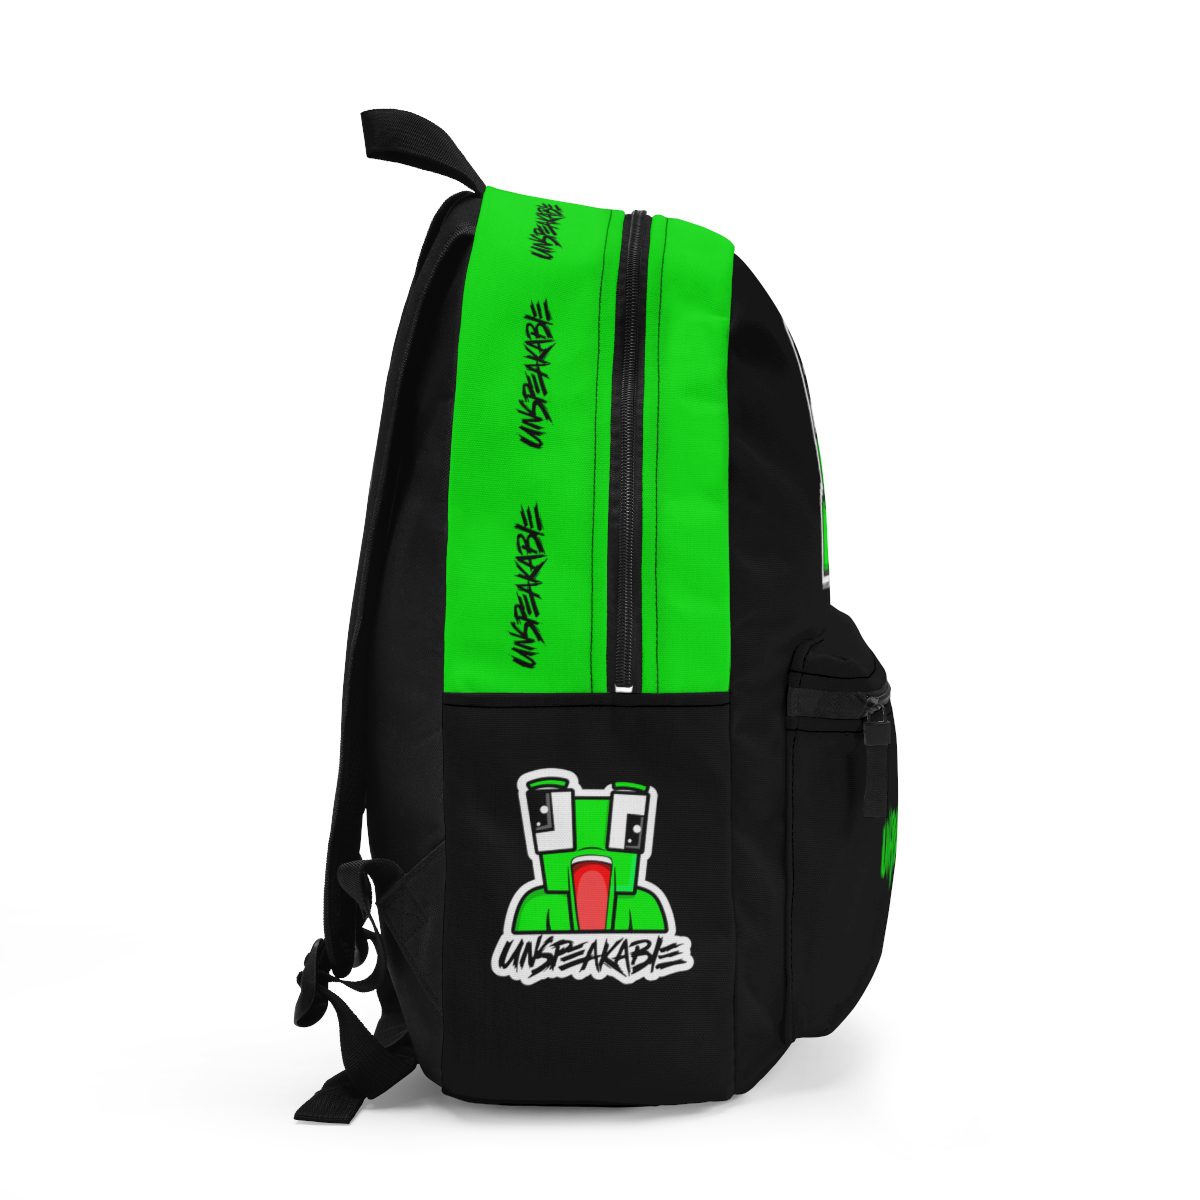 Unspeakable Gaming YouTube Channel Backpack in Black and Neon Green Cool Kiddo 17